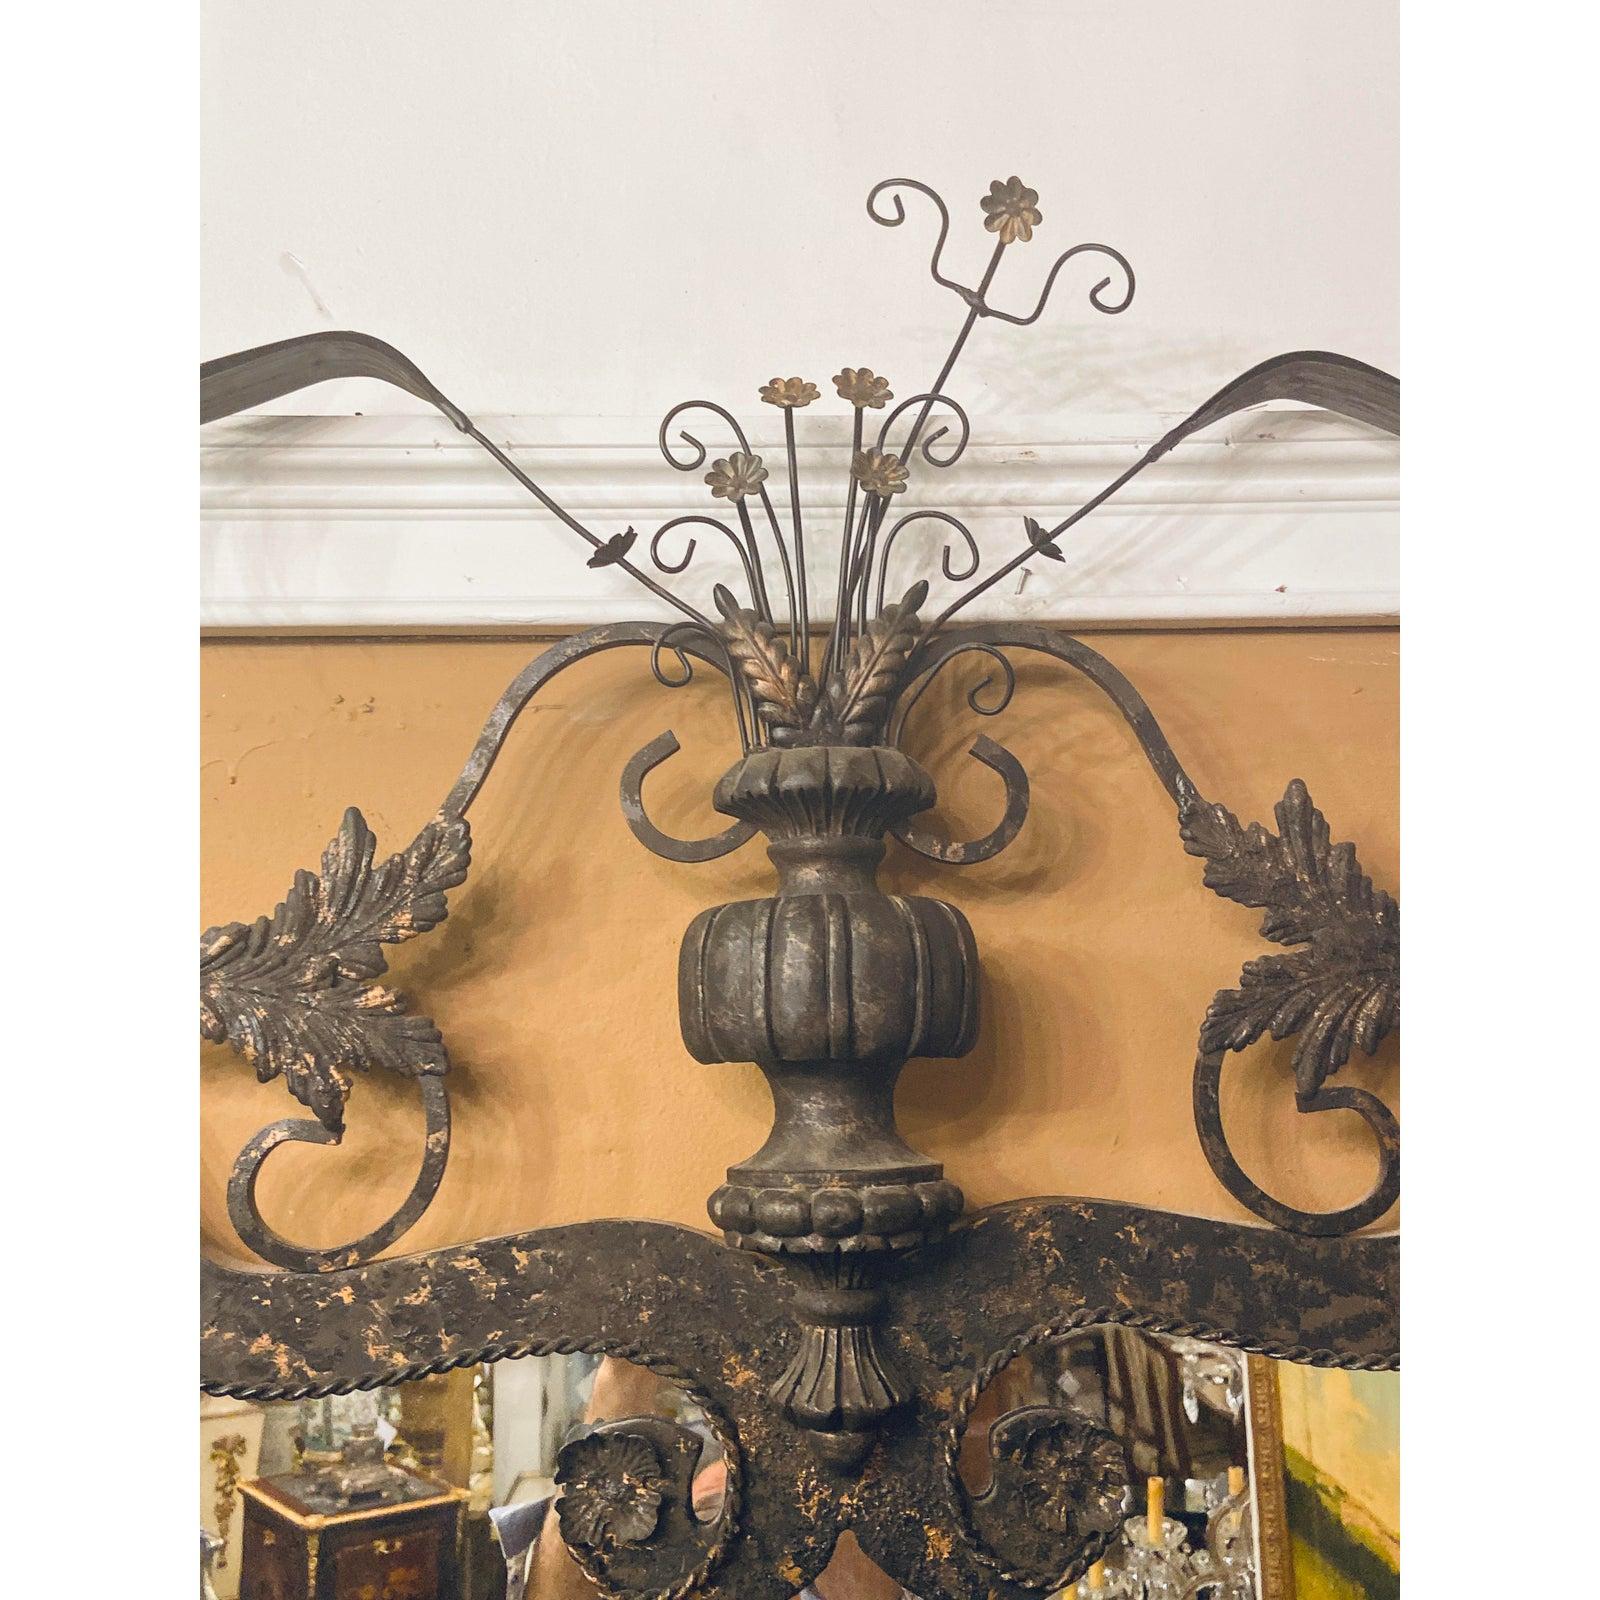  Wall or Console Mirror Neptune Design in Gilbert Poillerat Style Wrought Iron By John Richard. 

An impressive wrought iron Neptune style mirror in the manner of Gilbert Poillerat. The mirror features spectacular designs and details. A classical